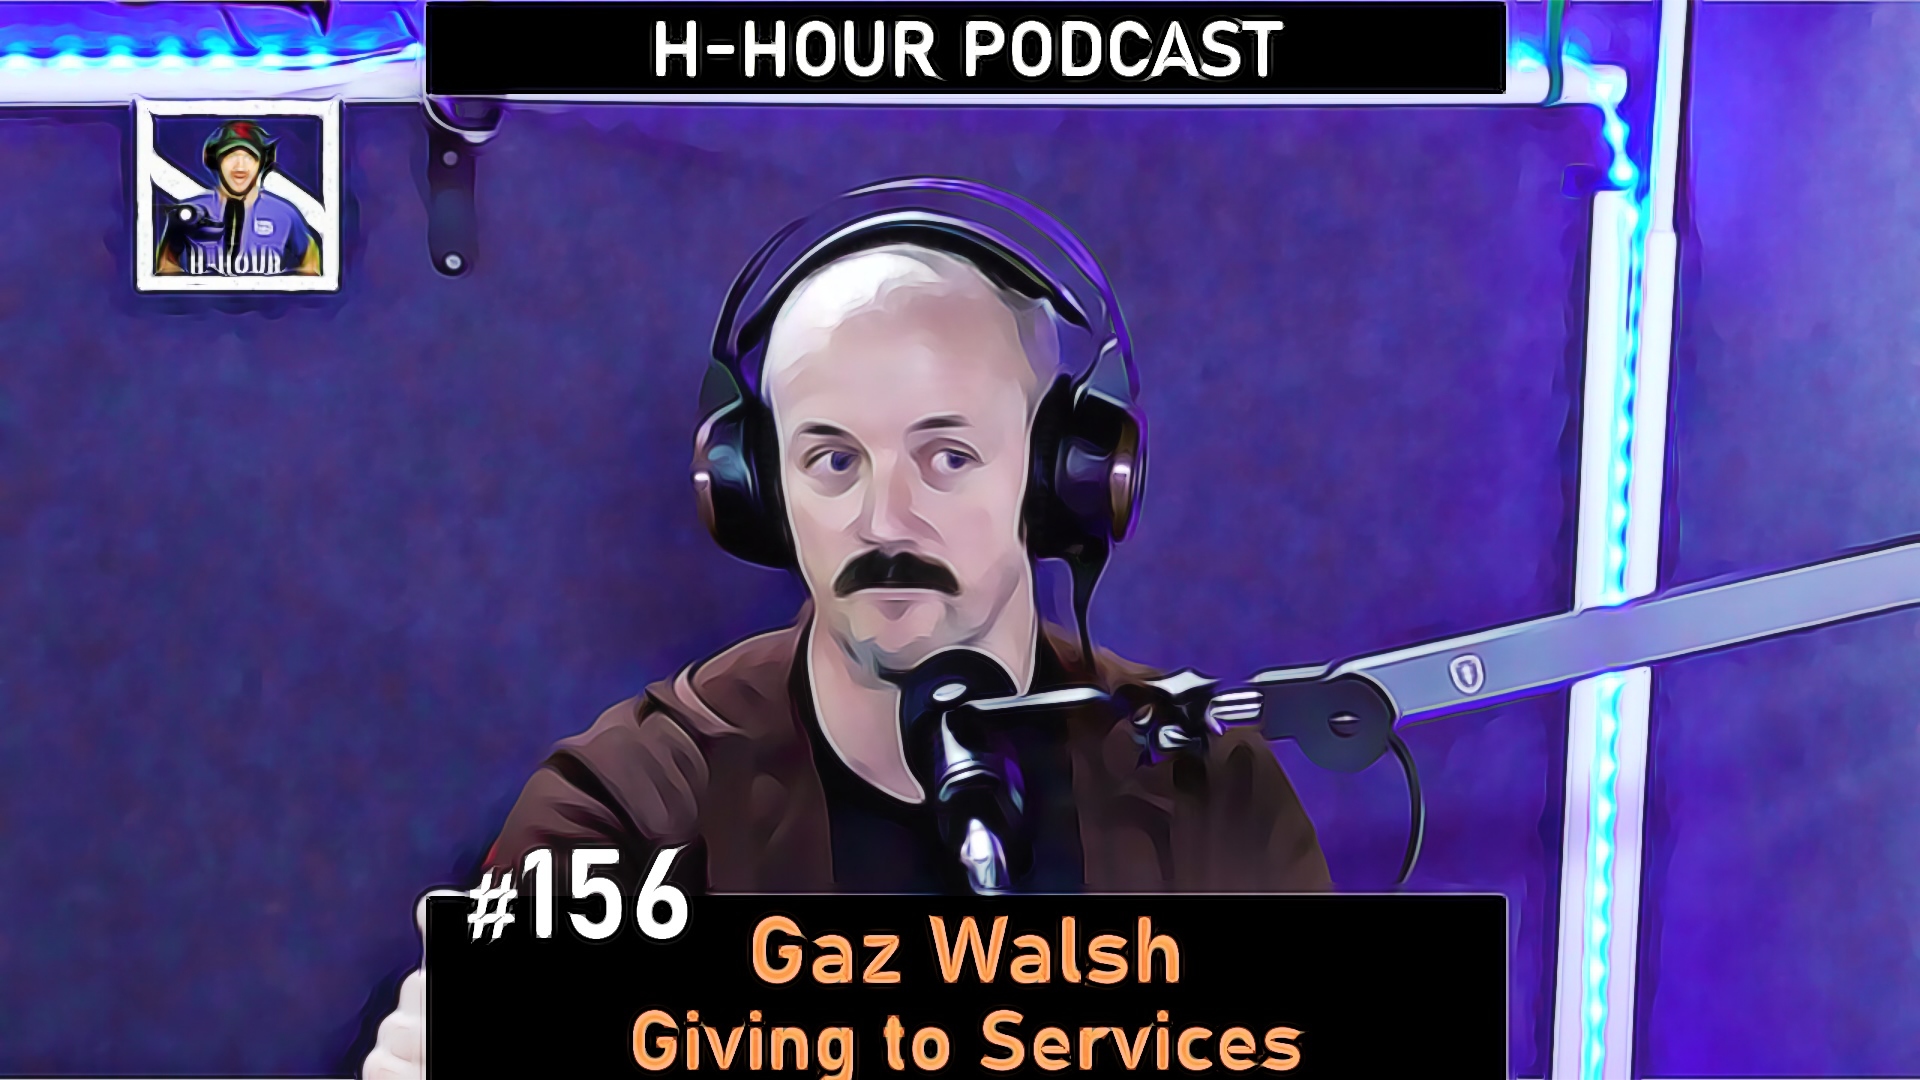 #156 NFT Podcast cover image 156 gaz walsh sin eaters guild giving to services